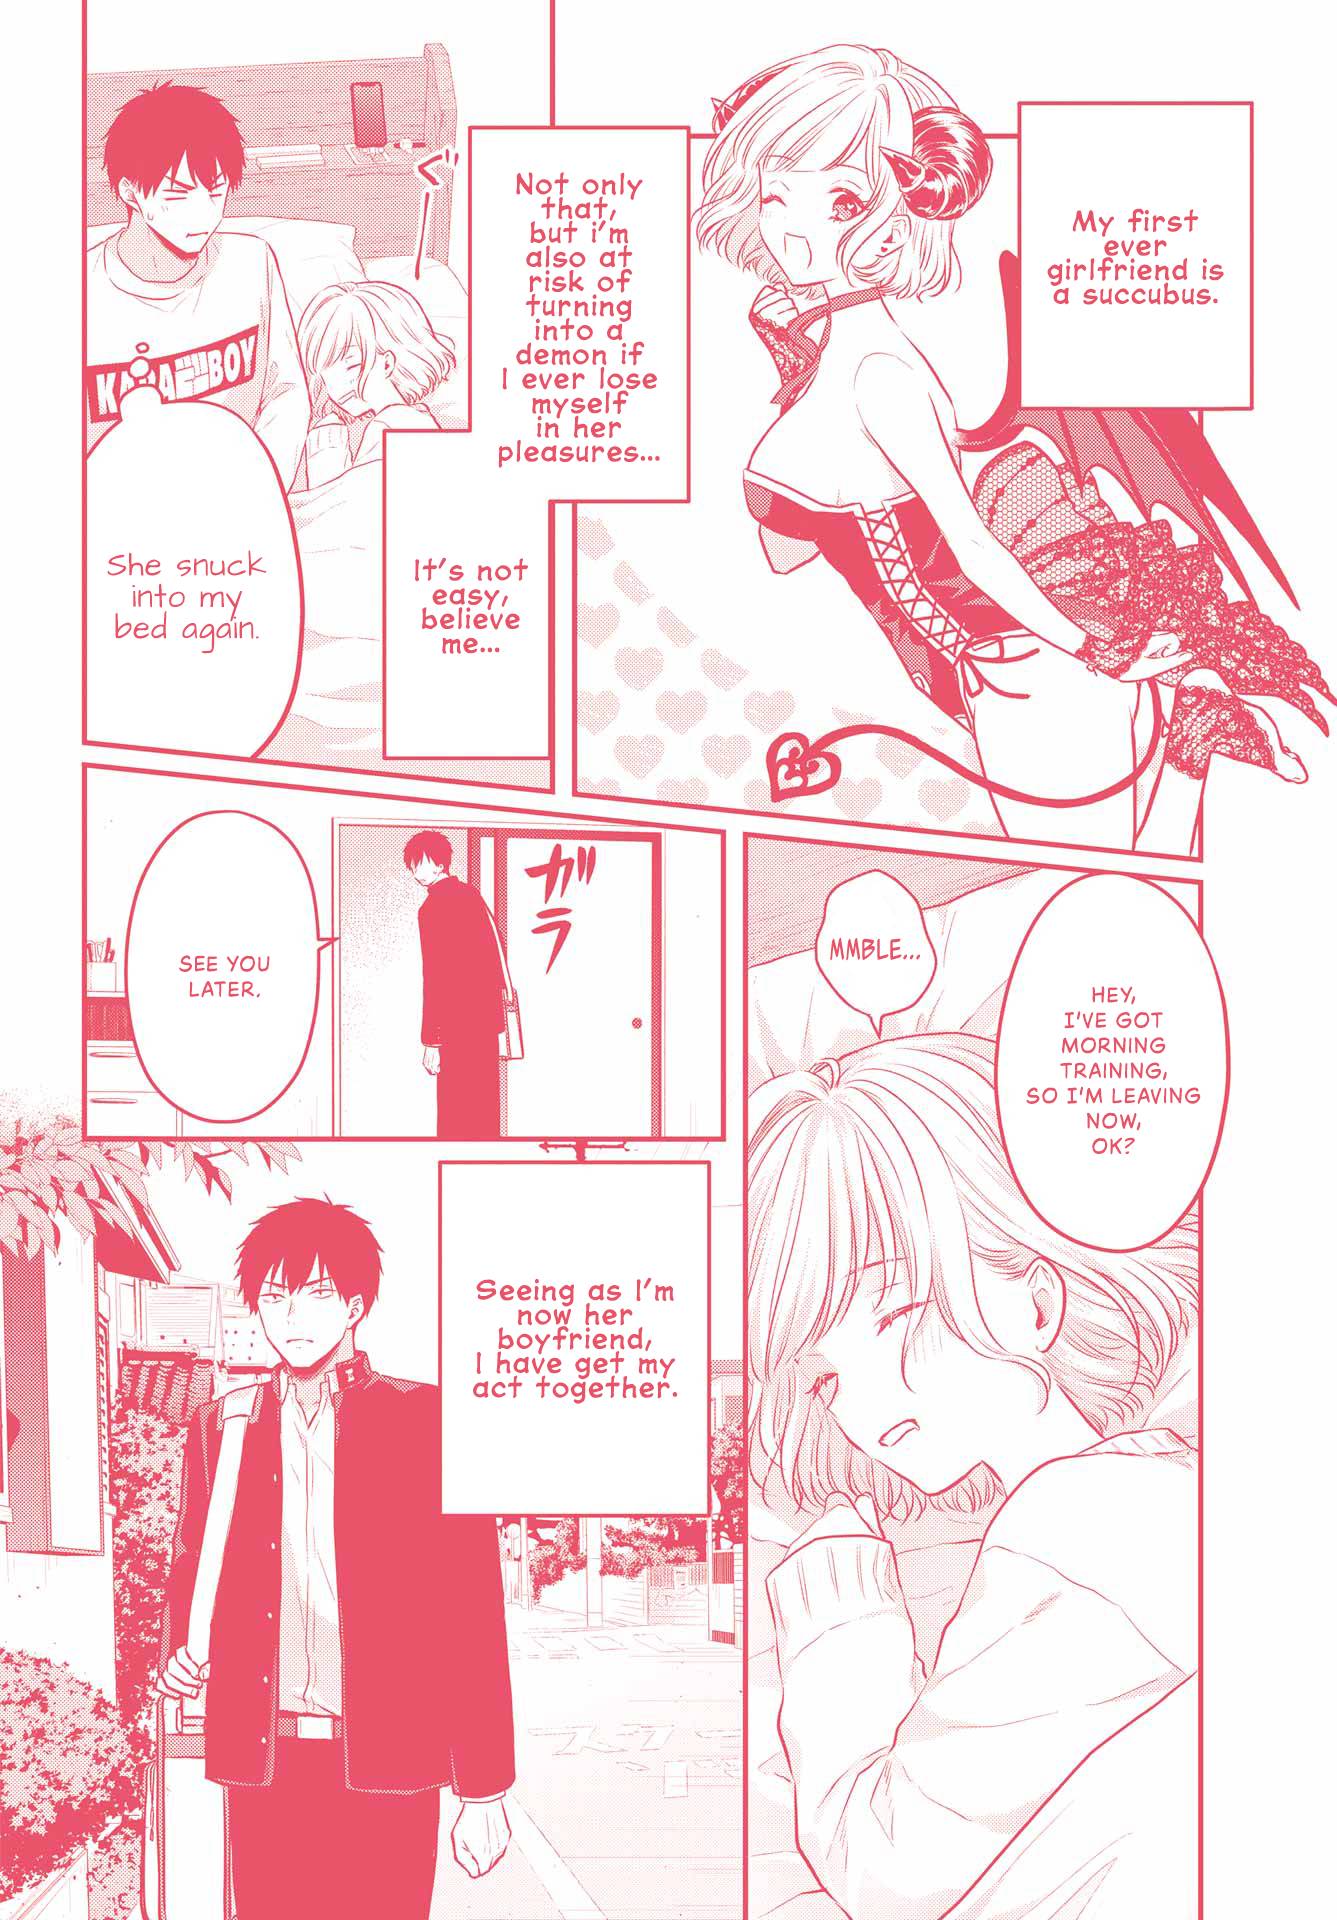 Seriously Dating a Succubus - chapter 3 - #2